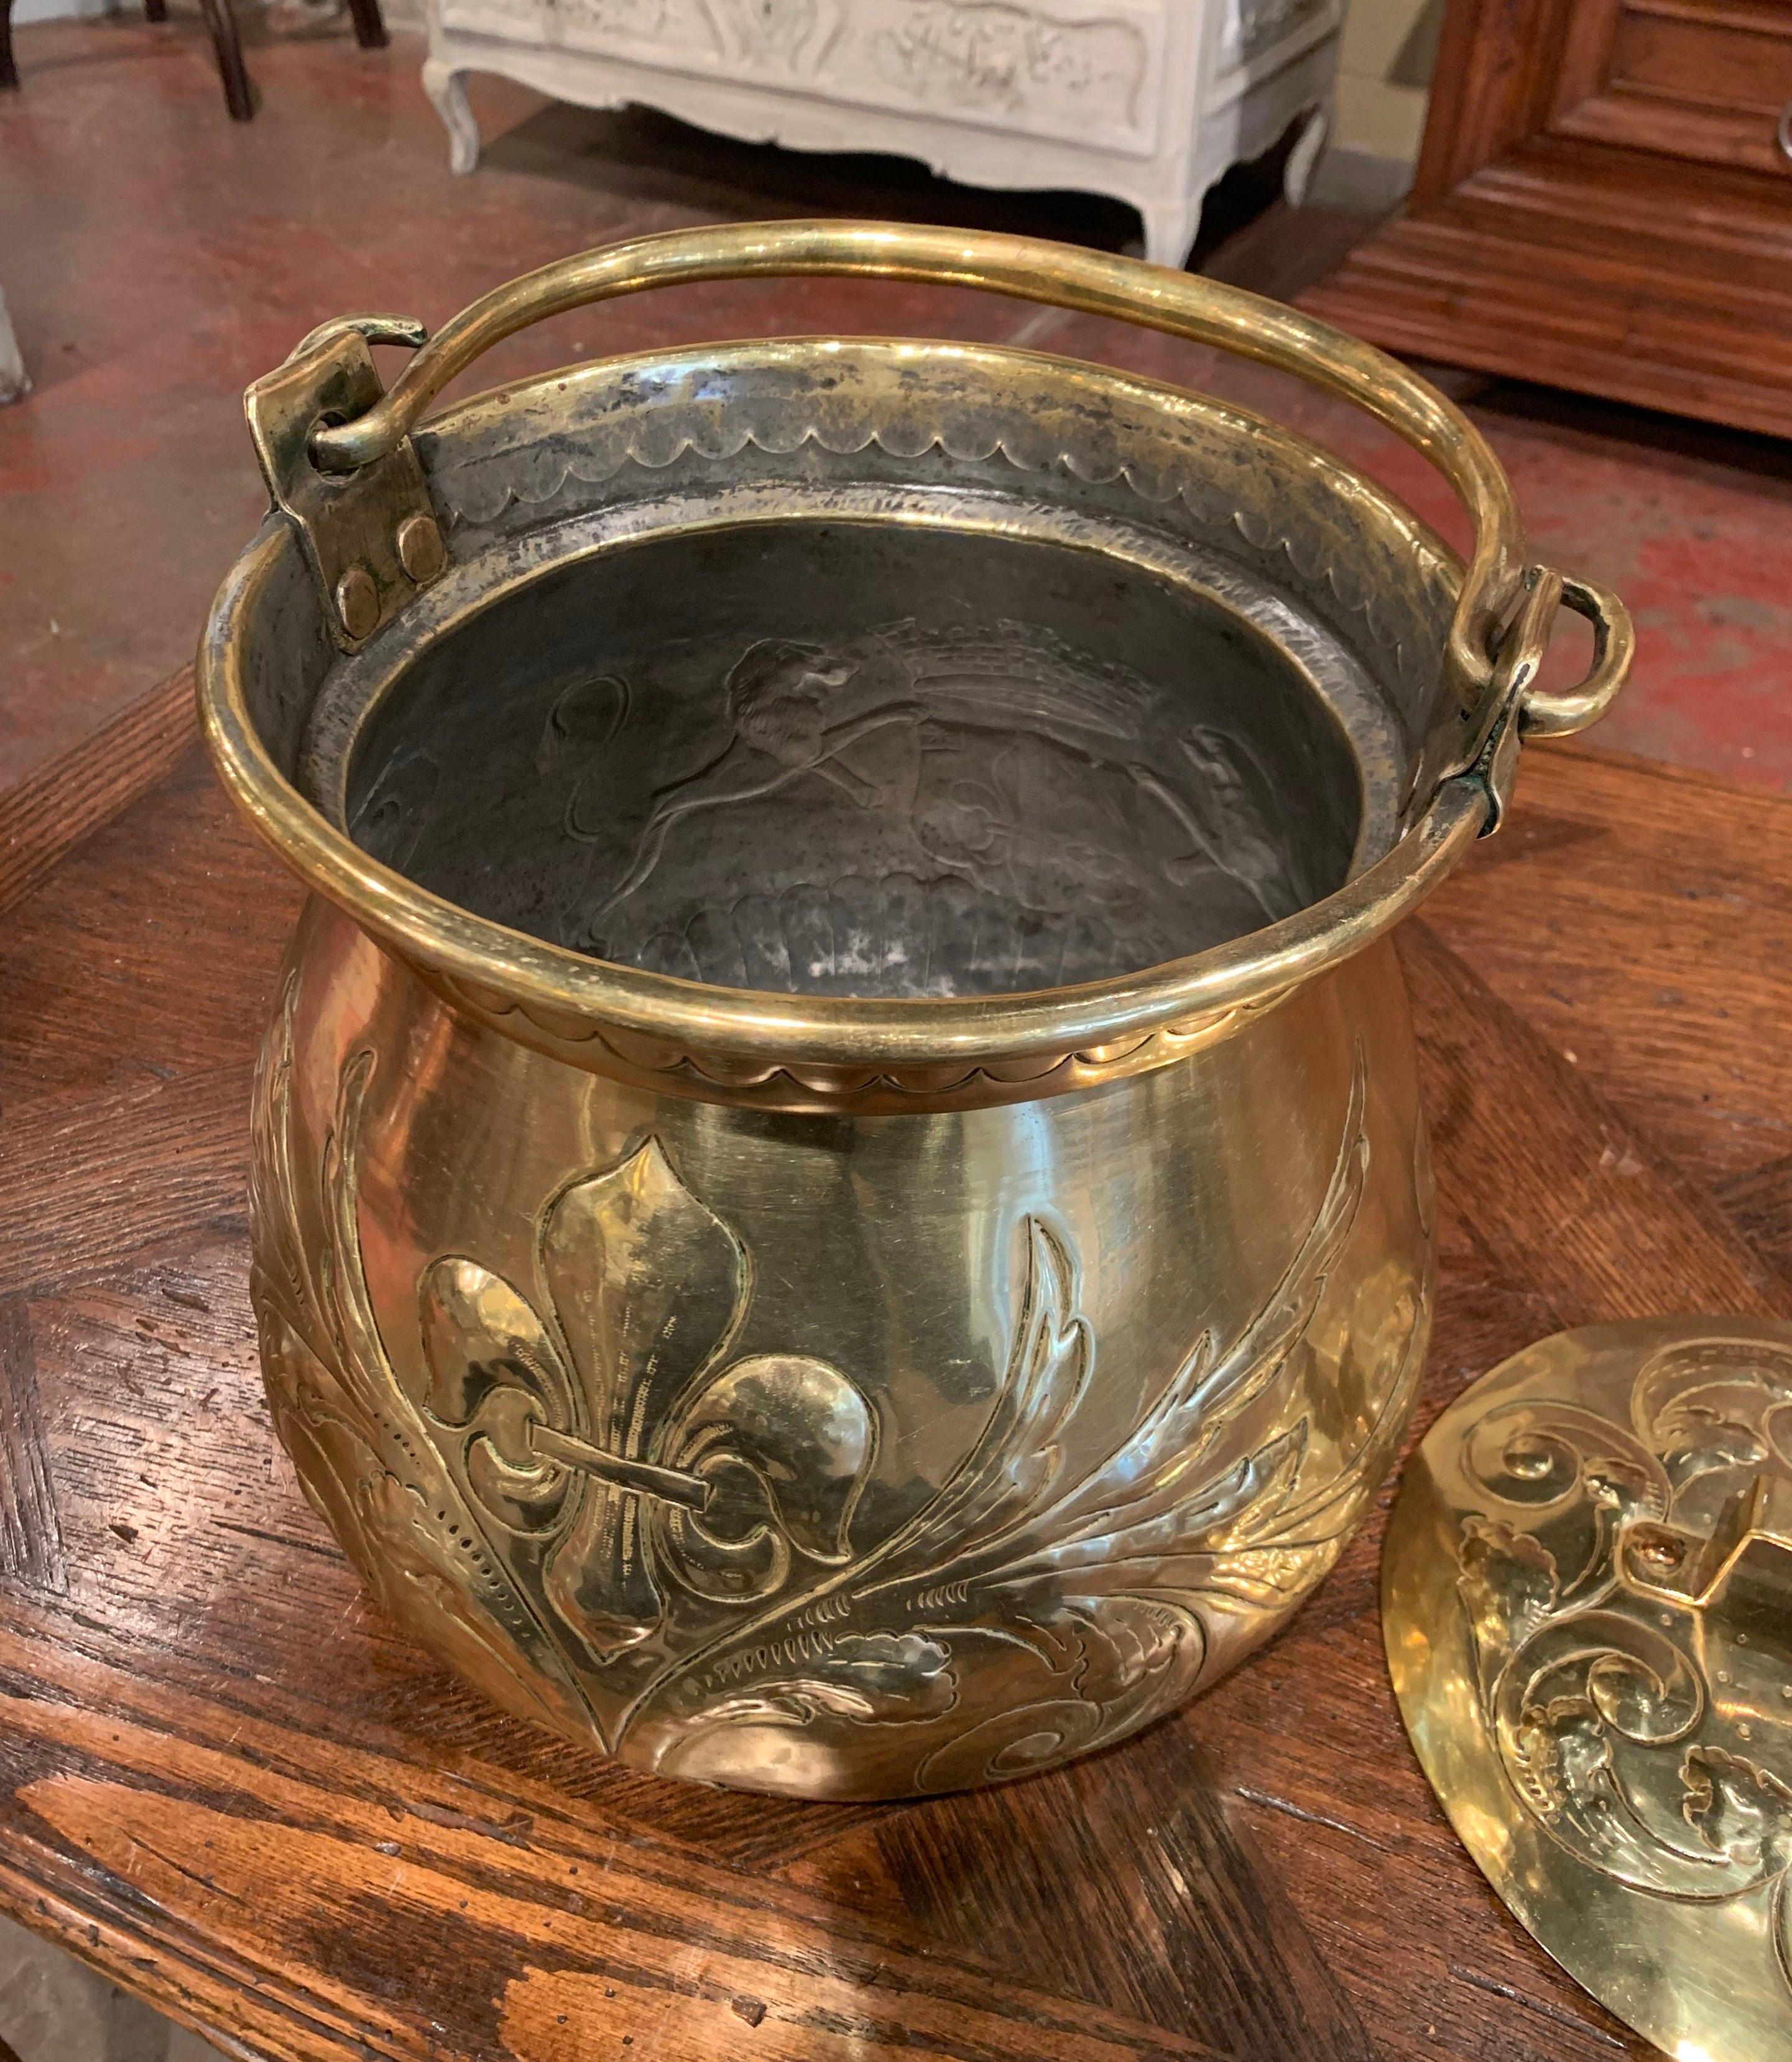 This period antique cauldron with original removable lid was created during the reign of King Louis XIV circa 1690, crafted of brass, the round dish features repousse decor of Fleur de Lys and the coat of arms of the kingdom of France flanked by